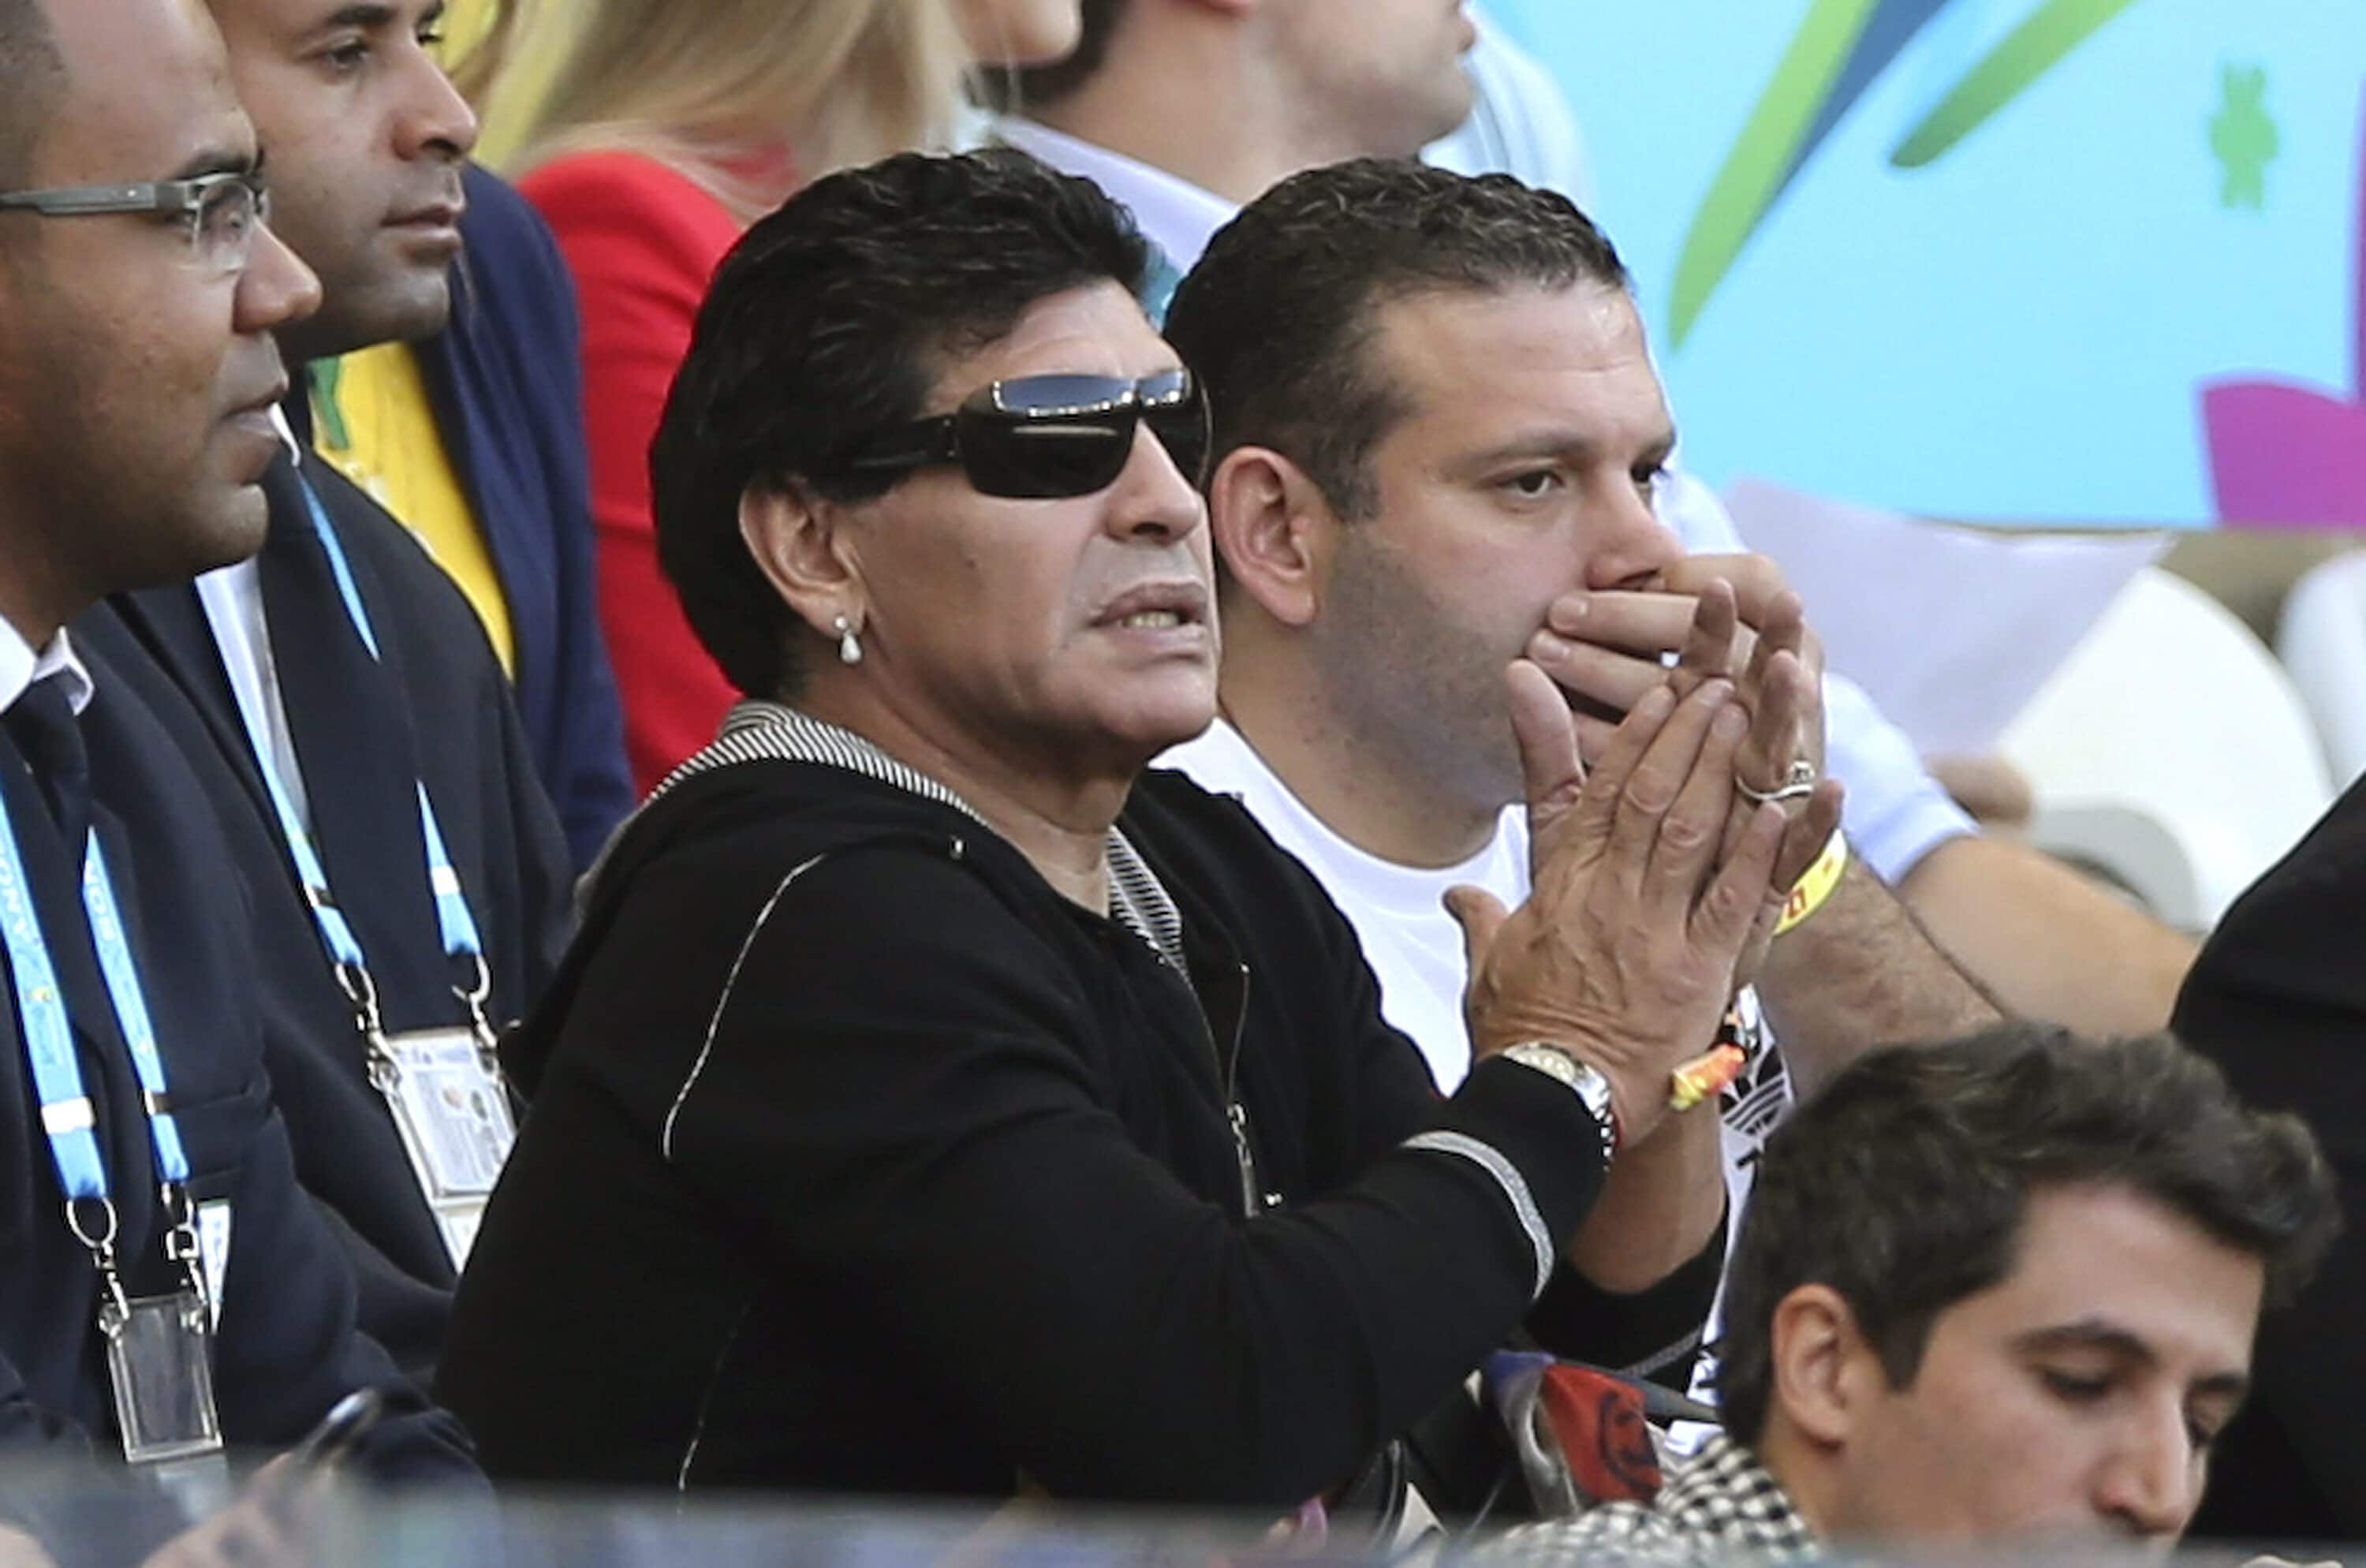 Argentinian soccer legend Diego Maradona during the FIFA World Cup 2014 match between Argentina and Iran on 21 June 2014, © BALLESTEROS/epa/Corbis